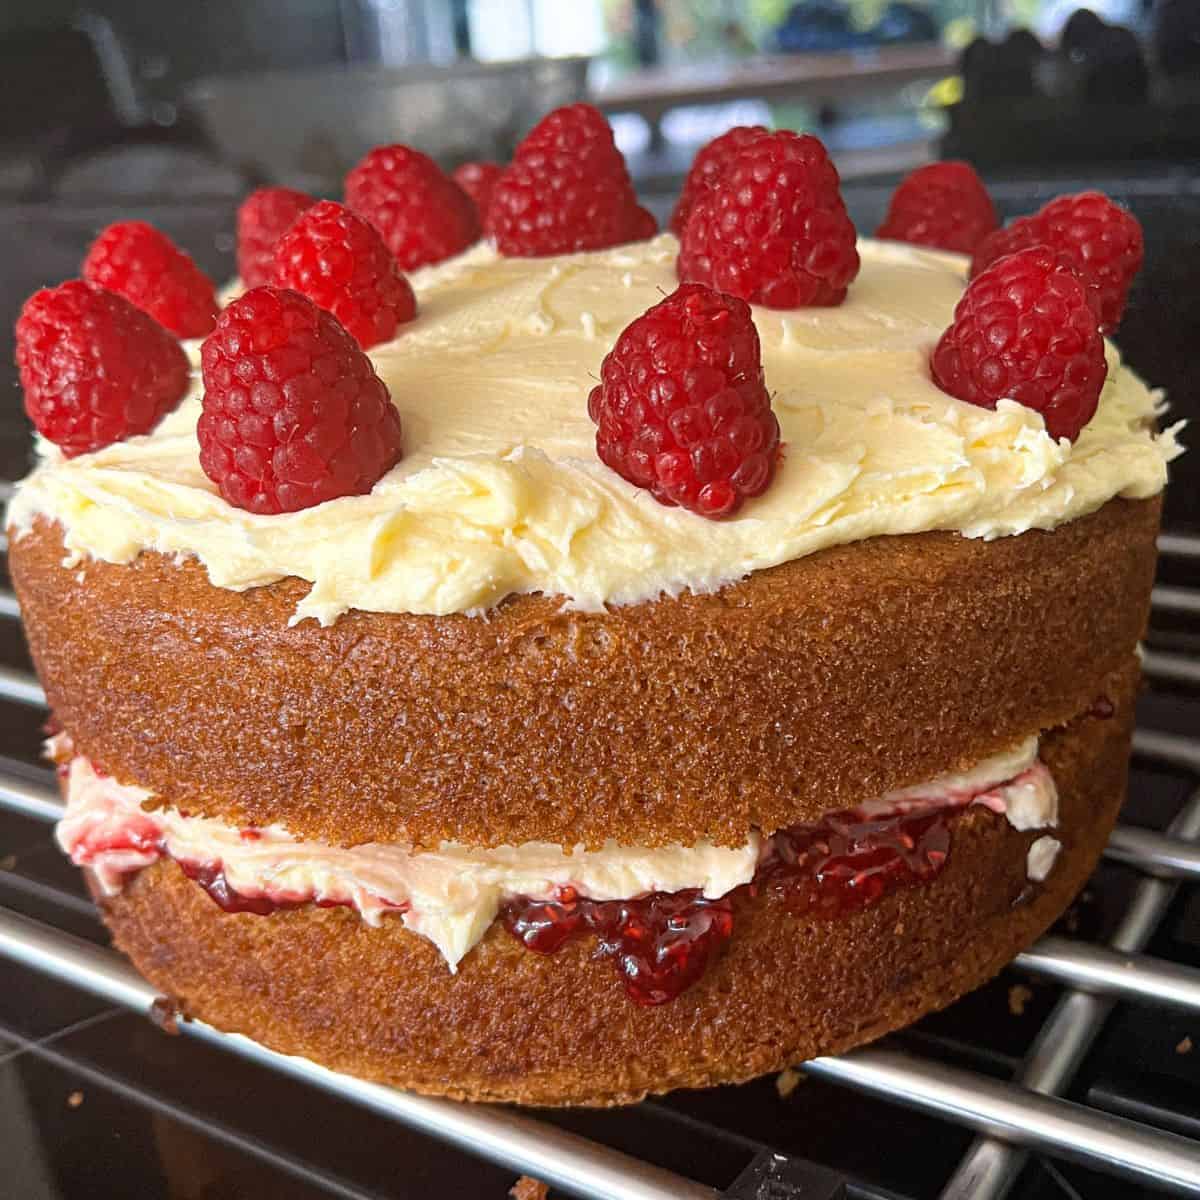 Victoria sponge with cream and jam in the middle, topped with buttercream and raspberries.